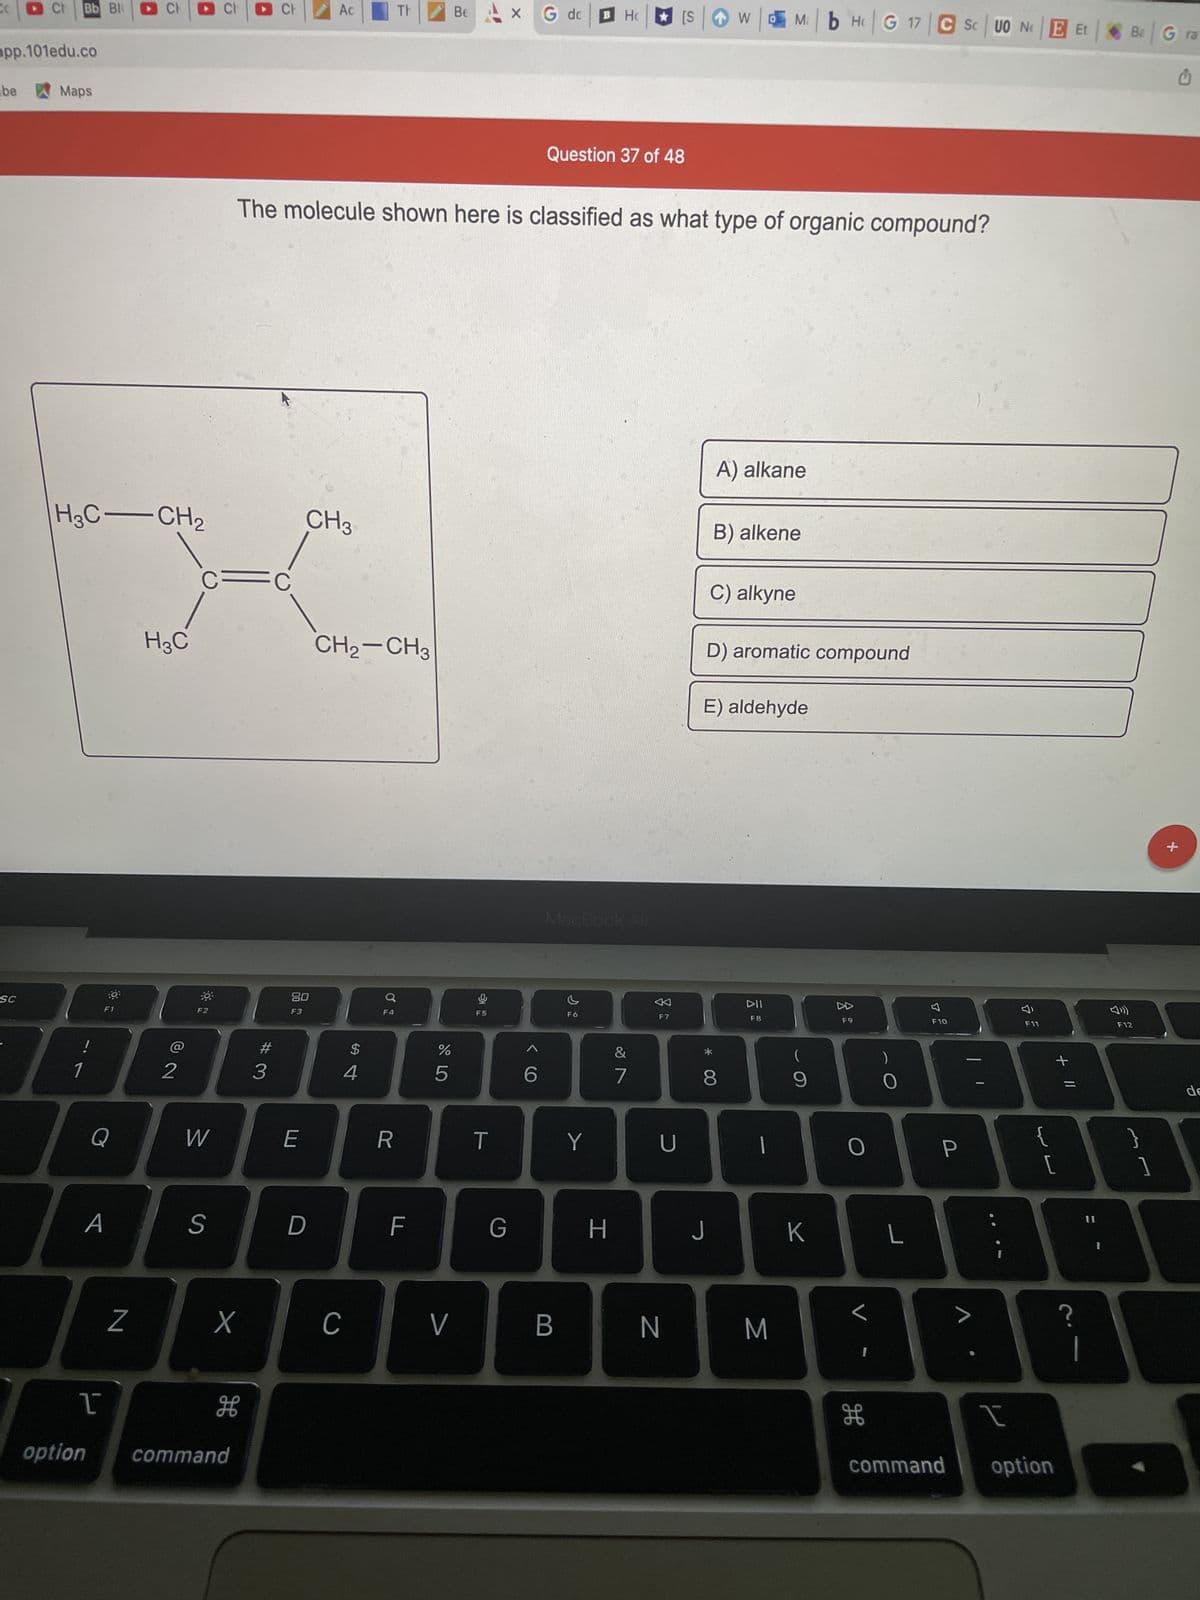 CO
Ch
app.101edu.co
be
Maps
SC
Bb Bl
!
1
H3C-CH₂
H3C
F1
Q
A
1
option
CH
N
@ 2
2
Ac
Be
G dc
B H
[S
Question 37 of 48
The molecule shown here is classified as what type of organic compound?
A) alkane
B) alkene
CH3
C=C
C) alkyne
D) aromatic compound
E) aldehyde
DII
F8
F2
T
W
S
X
дв
command
#3
80
F3
E
D
CH₂-CH3
F4
с
$
4
R
F
%
5
V
F5
T
X
G
6
B
F6
Y
H
&
7
F7
U
N
8
J
w Mb Hc G 17 CS UO NE Et |
|
M
(
9
K
F9
O
H
)
O
L
F10
P
F11
WE
{
+ 11
[
t
command option
Ba Gra
C
F12
}
1
+
de